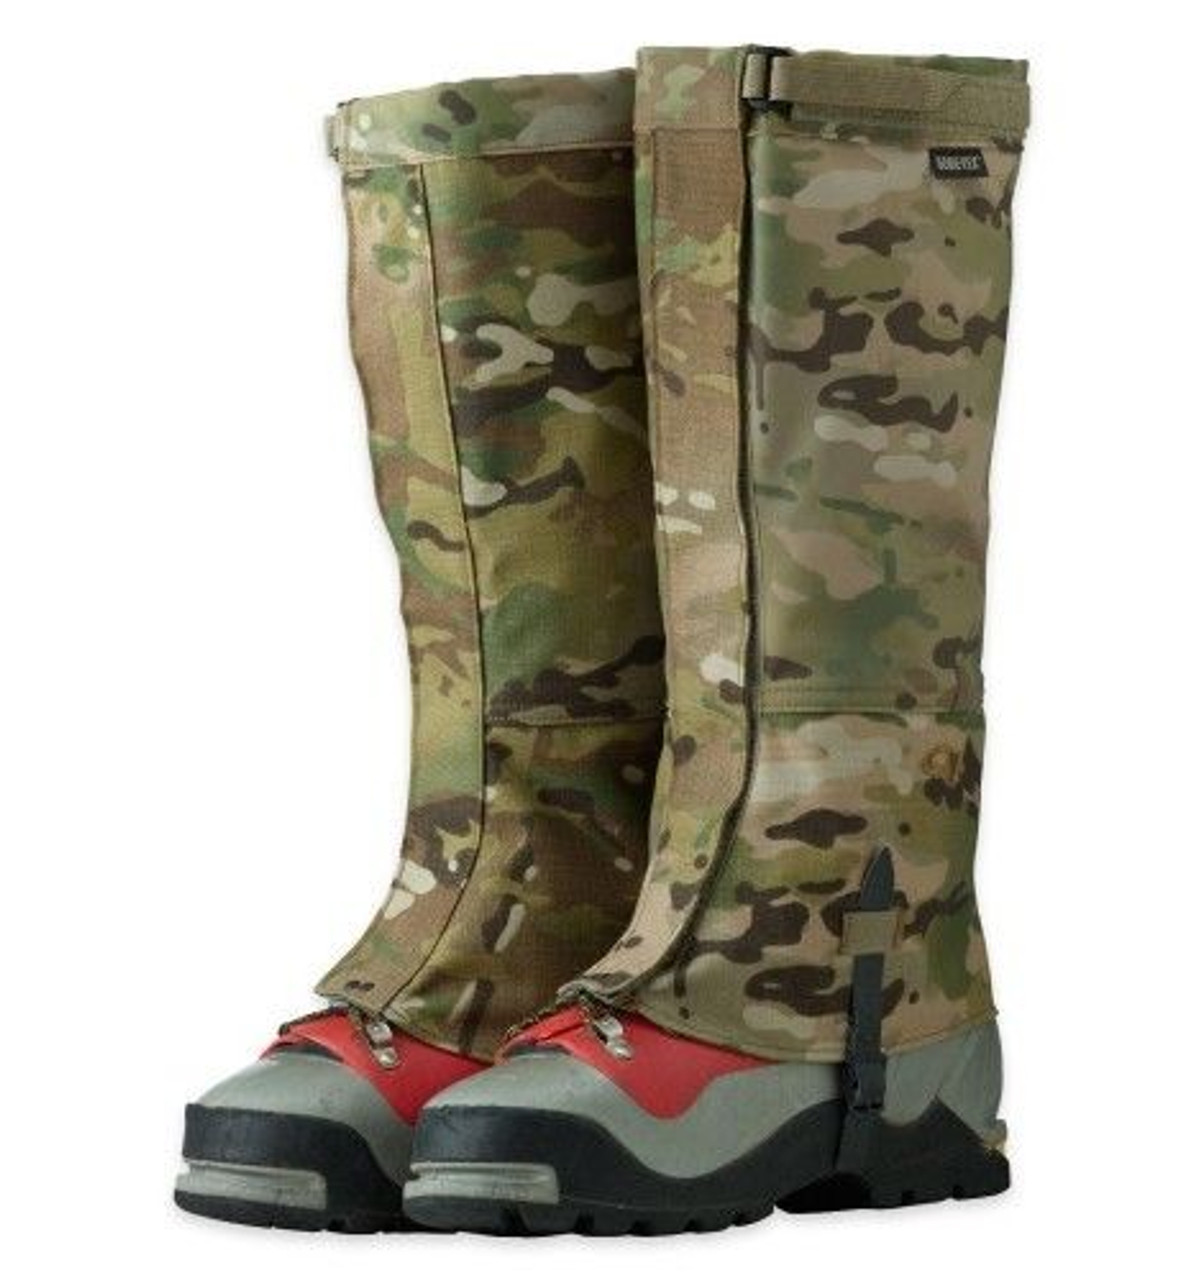 Outdoor Research Expedition Crocodile Leg Gaiters Multicam Gore